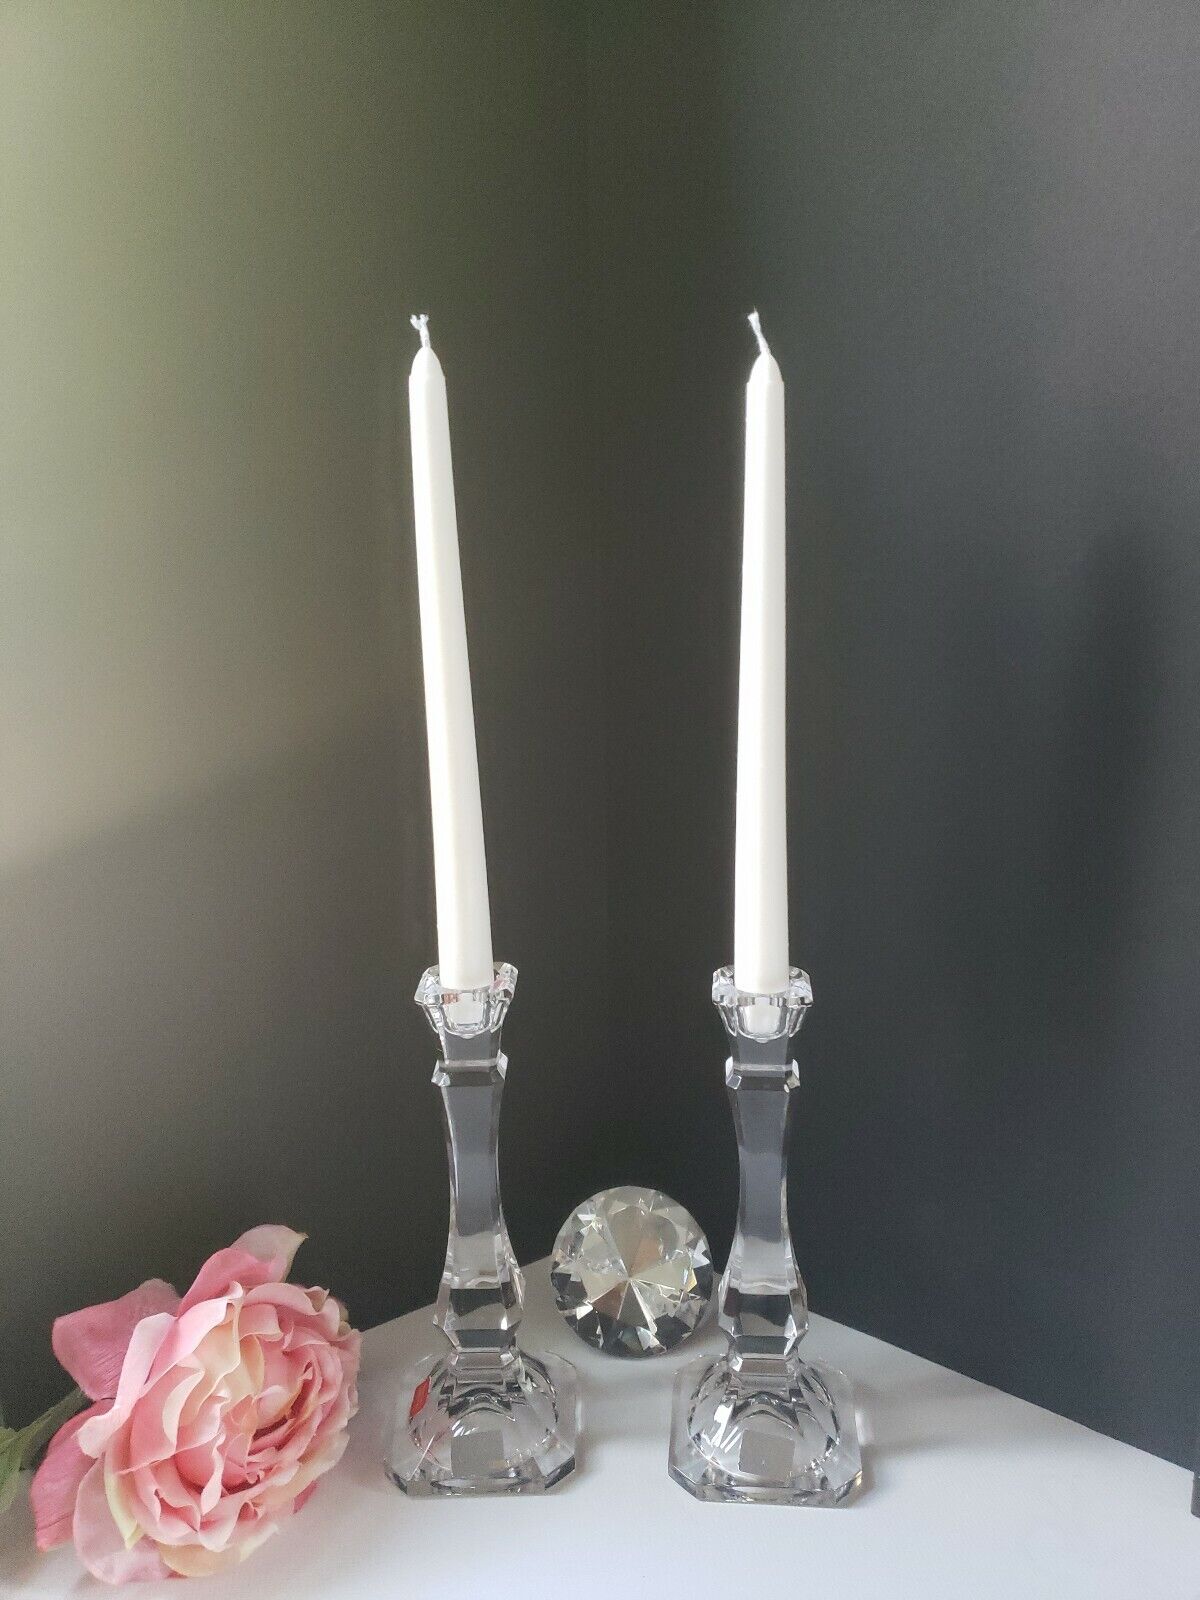 Mikasa - Pair of Lead Crystal Candle Holders  Made in Austria - NEW/DISPLAY ITEM Mikasa - фотография #8